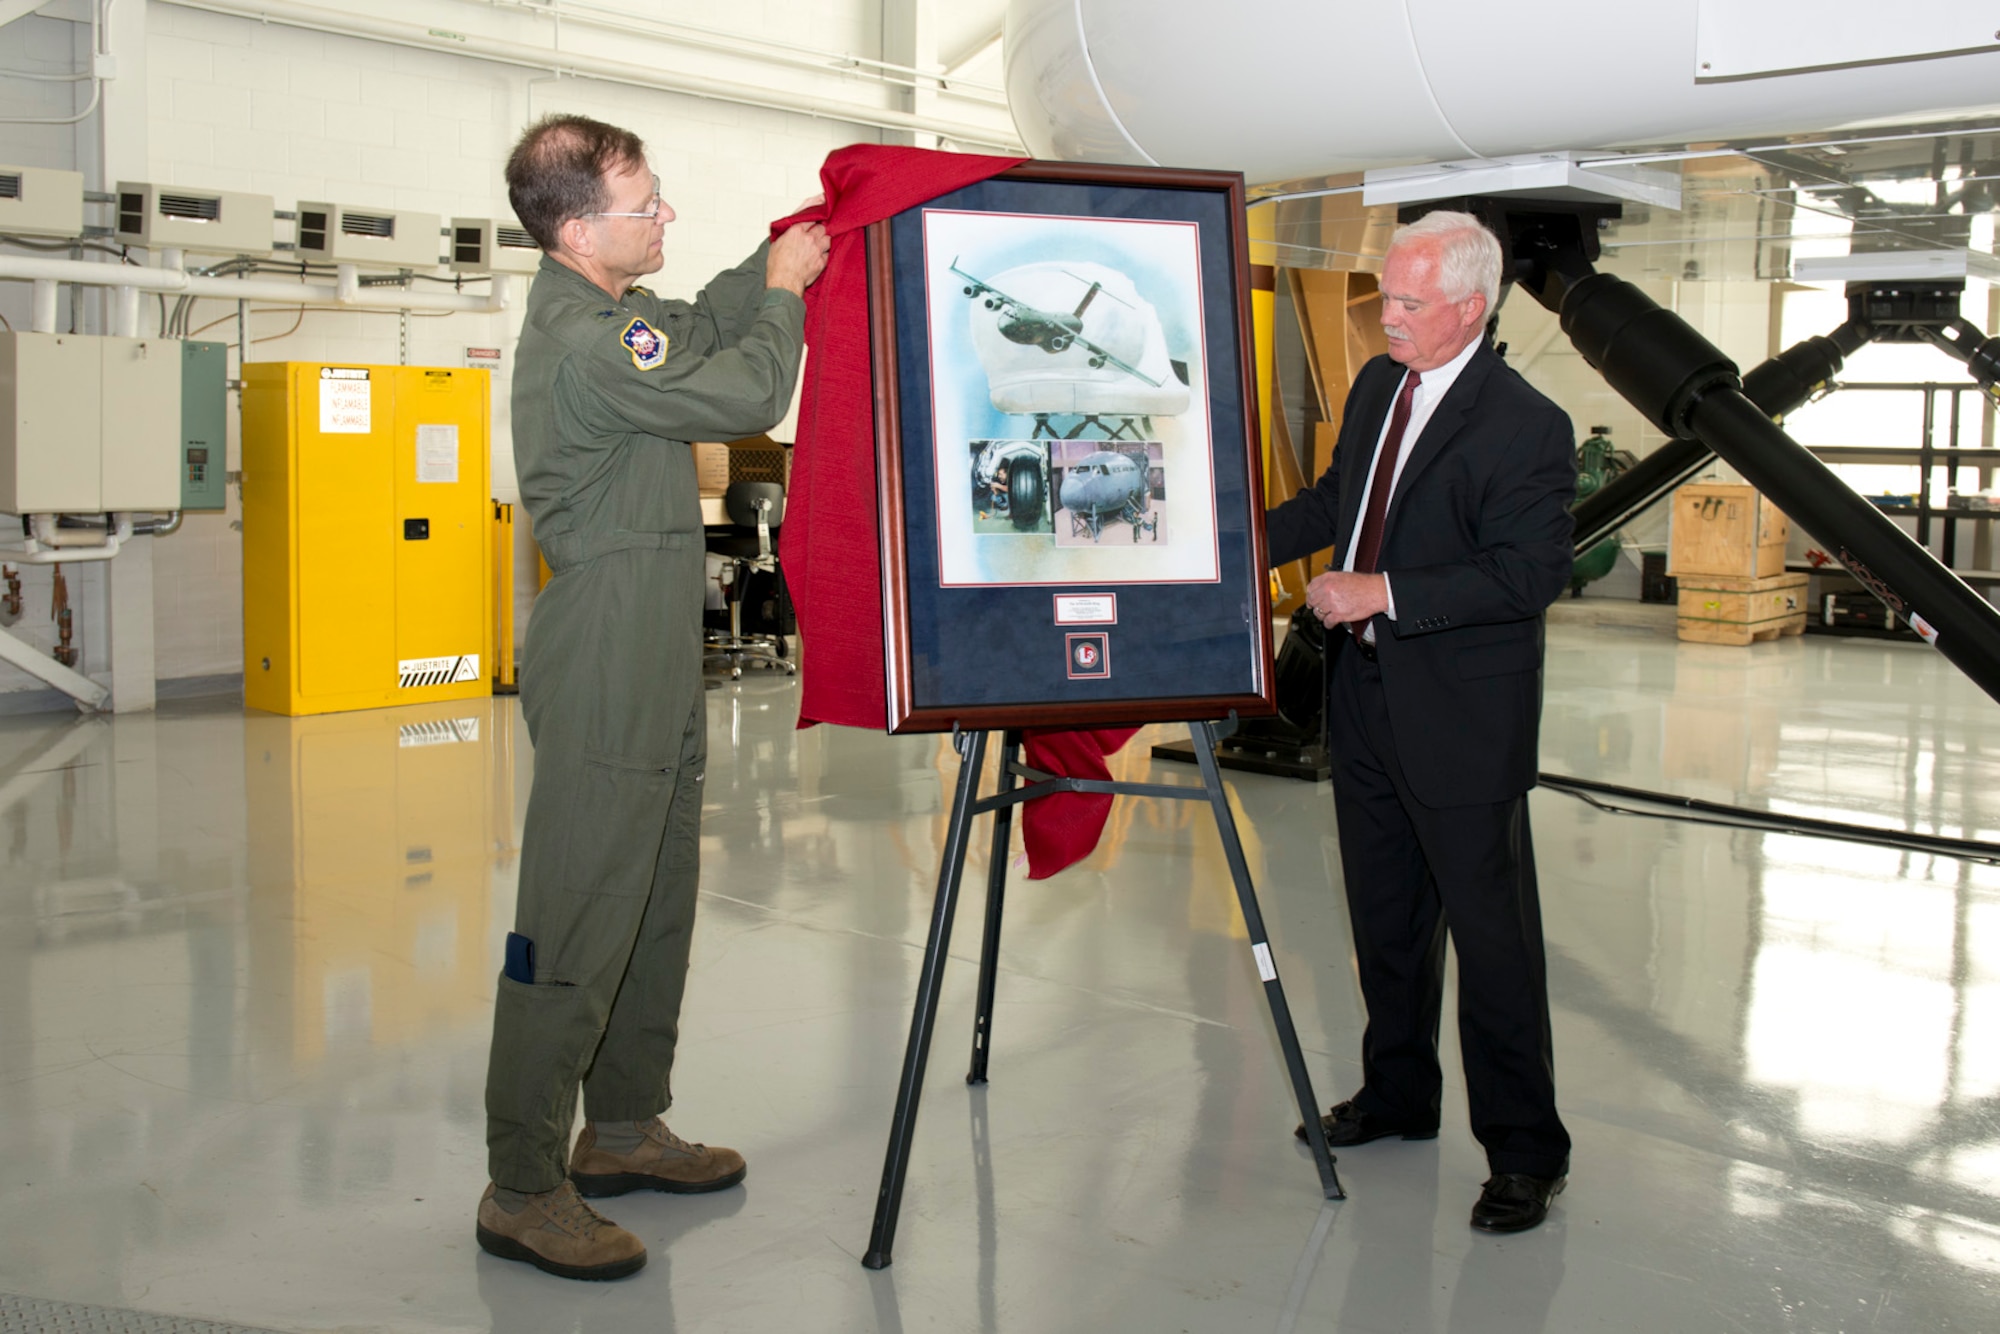 Col. Richard Robichaud, 167th Operations Group commander, assists Rodney Shrader, director of Air Force programs with L-3 Link Simulation and Training, with the unveiling of a framed print presented to the 167th Airlift Wing during the C-17 simulator training facility ribbon cutting ceremony, Sept. 24.(U.S. Air National Guard photo by Master Sgt. Emily Beightol-Deyerle/Released)